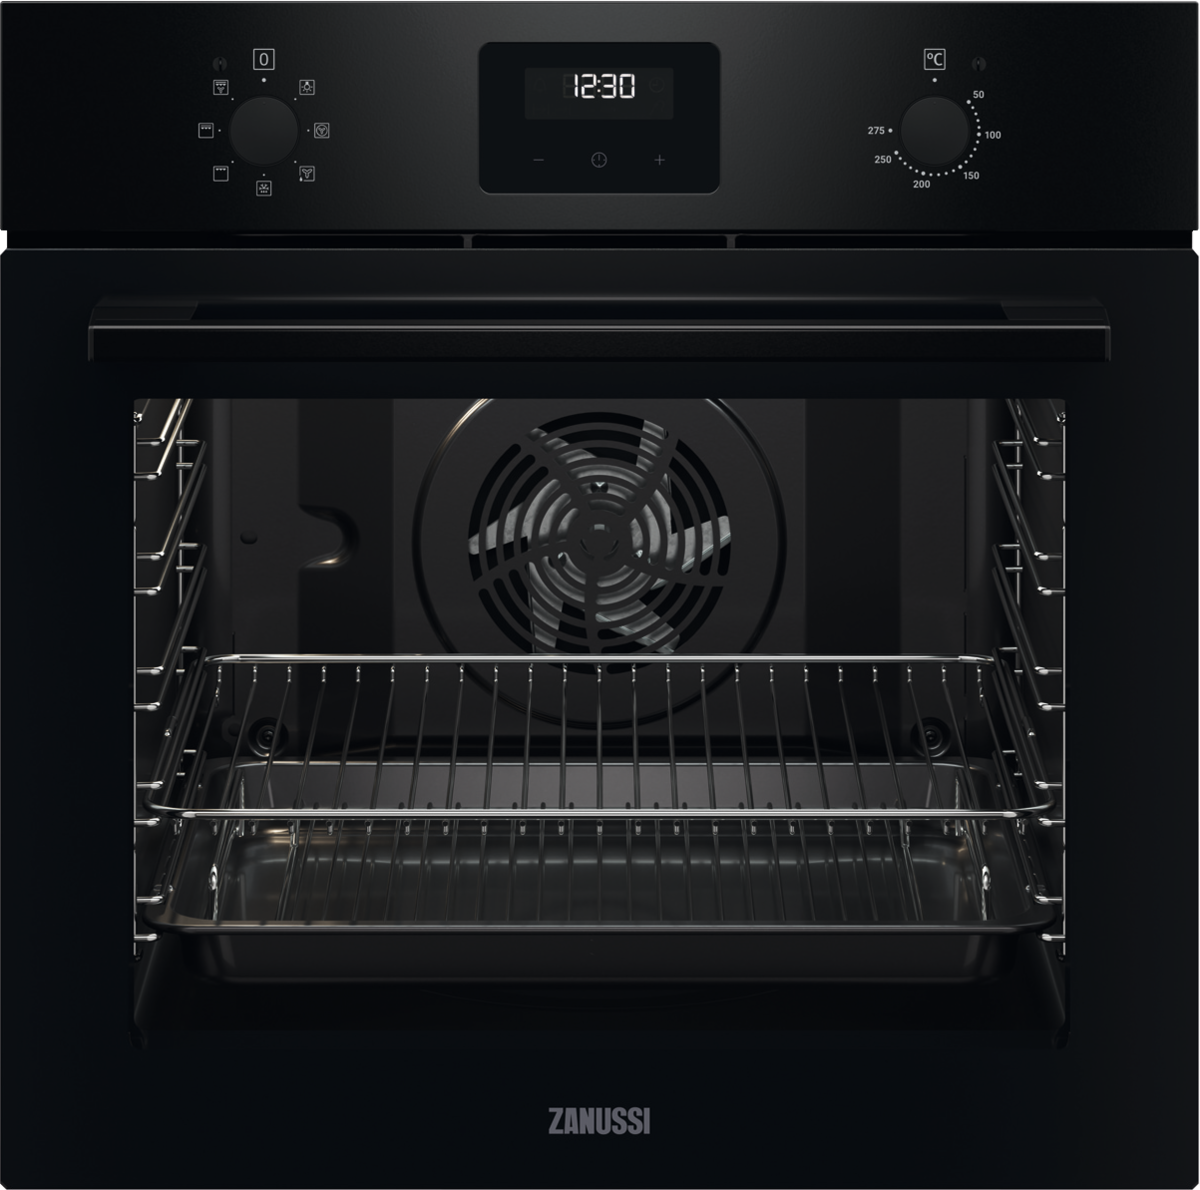 Zanussi ZOHNX3K1 Built In Electric Single Oven - Black - A Rated, Black